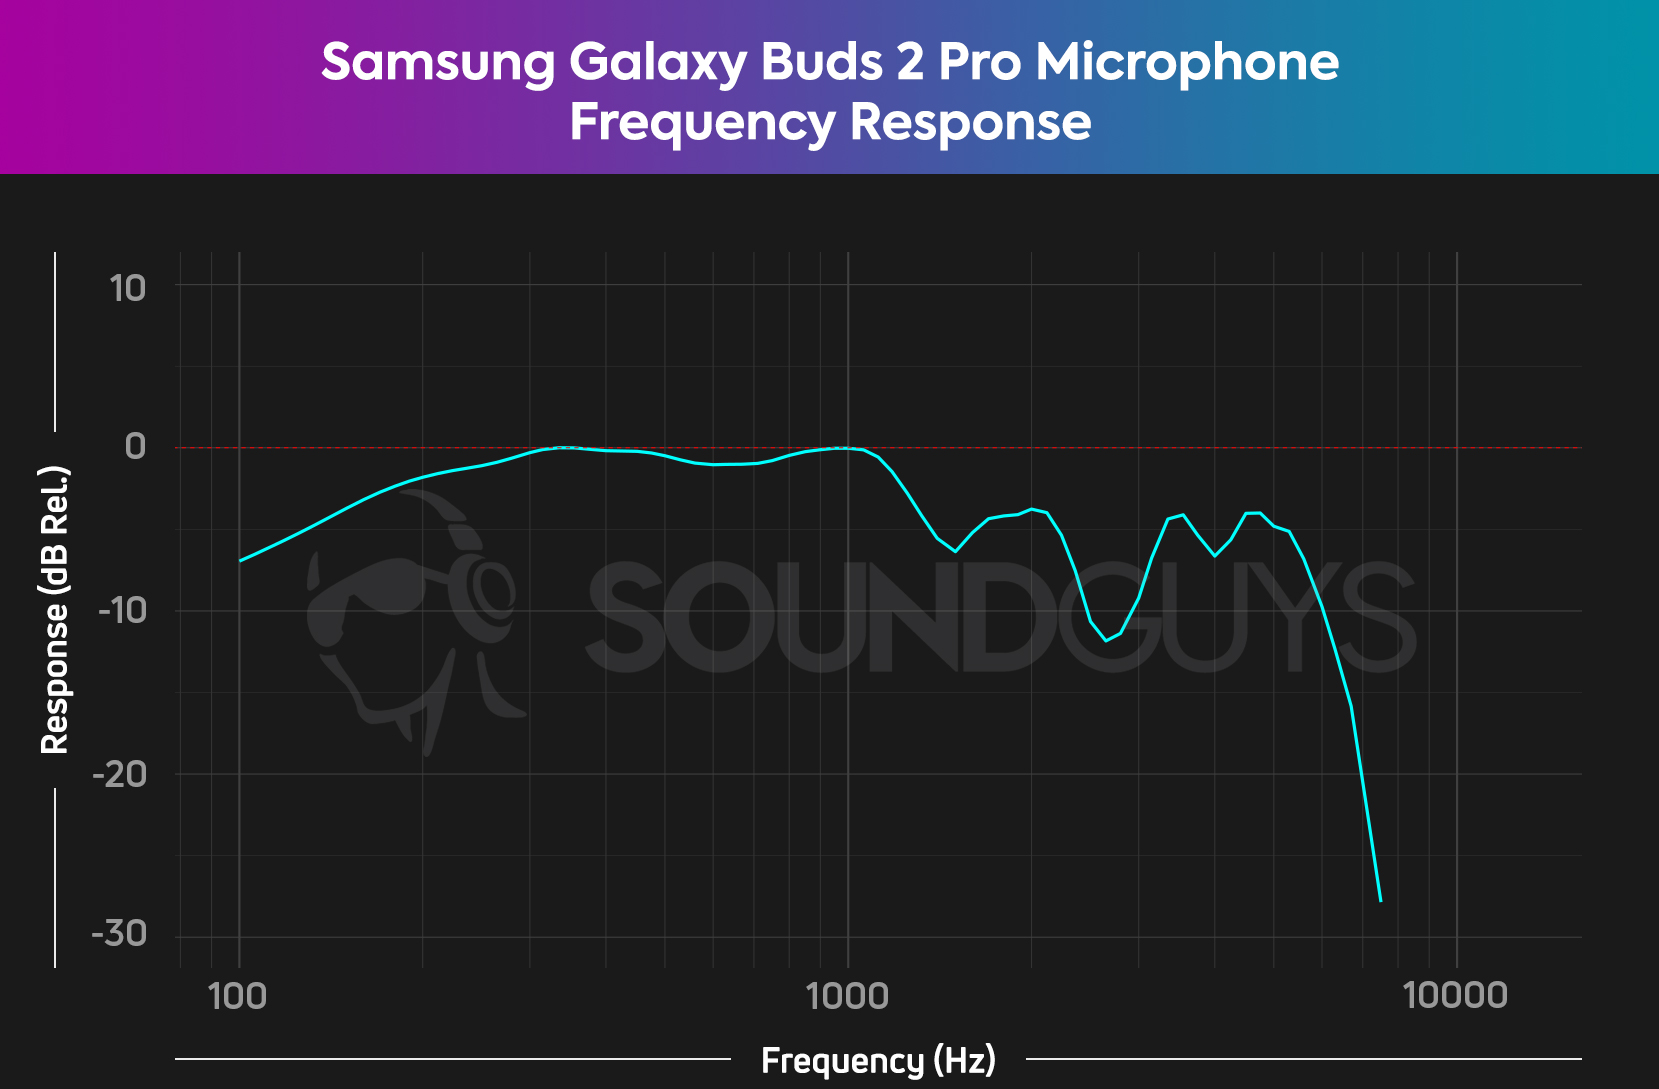 This chart shows the microphone frequency response of the Samsung Galaxy Buds 2 Pro and that it is average for true wireless earbuds.